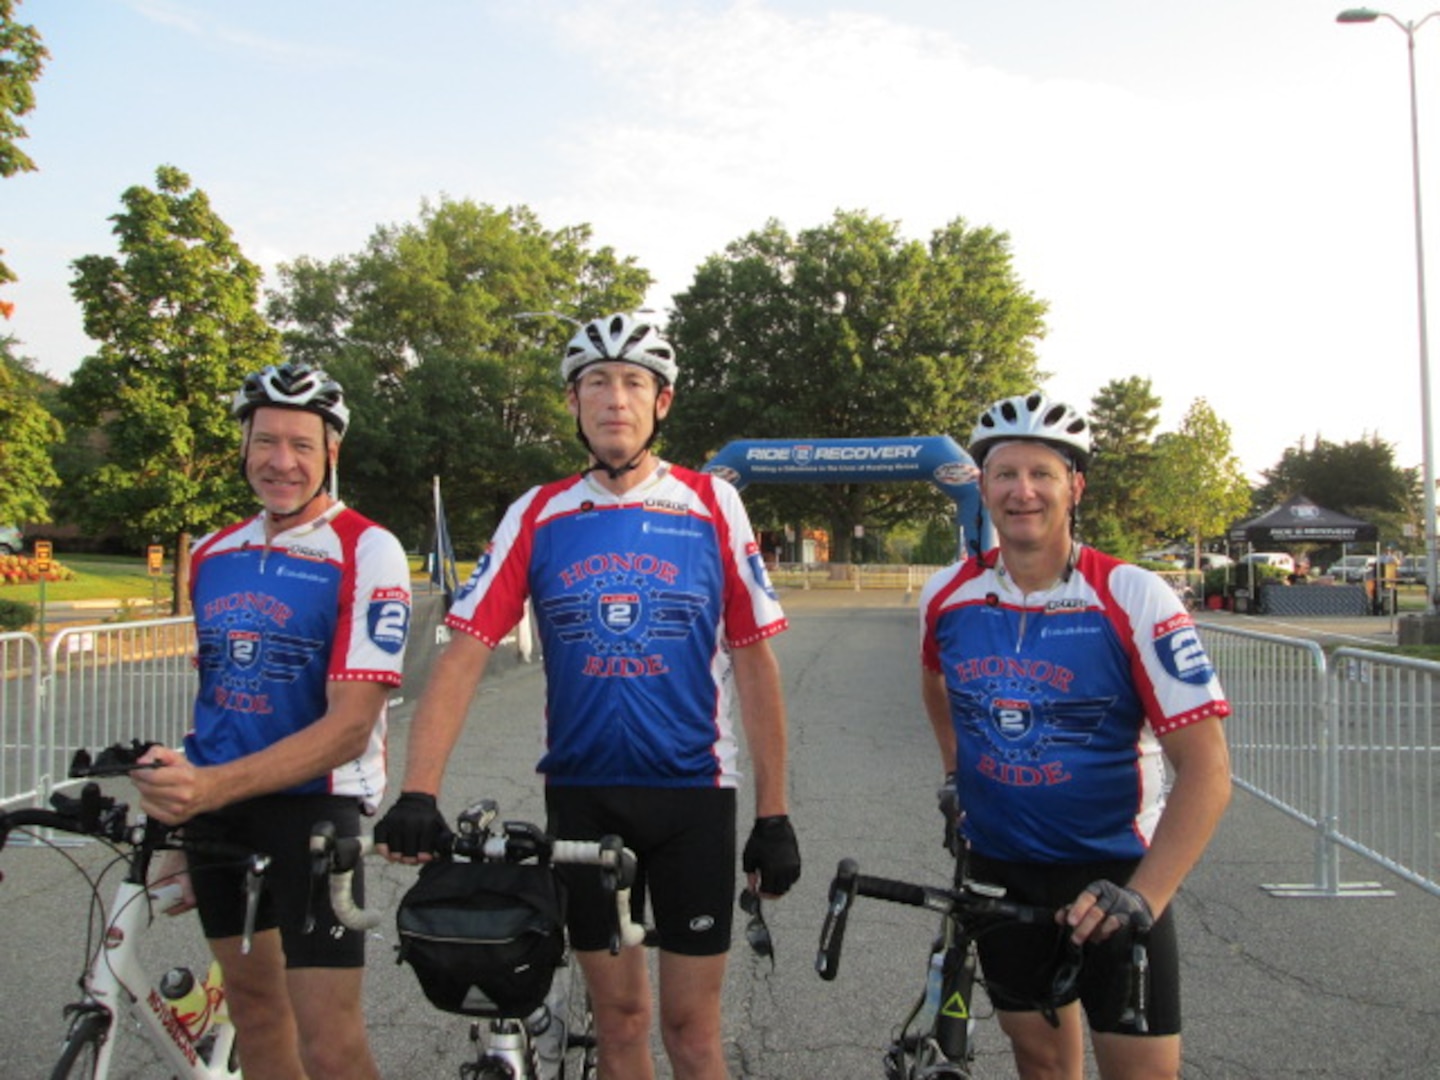 Three Defense Contract Management Agency quality assurance employees participated in a cycling event to raise awareness of veteran issues. Edward Lowden, Edward Saunders and Richard Nelson participated in the Ride 2 Recovery Honor Ride, a 60-mile cycling event in Washington, D.C., Sept. 10. (Photo courtesy of Edward Lowden)